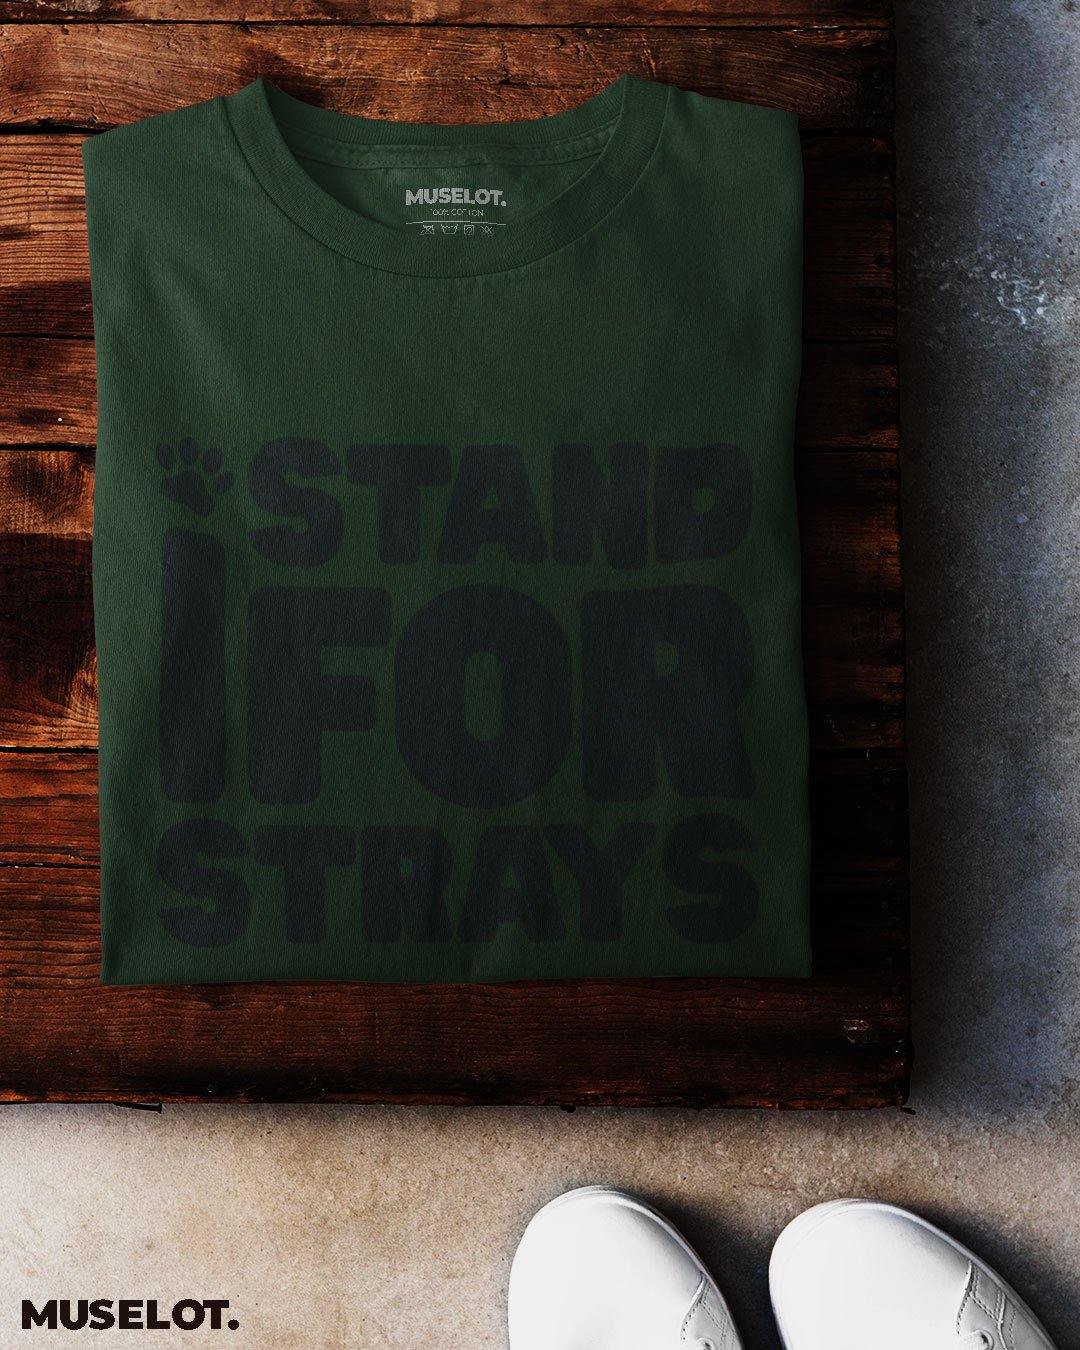 printed t shirts - I stand for strays ( Dark colors )  - MUSELOT